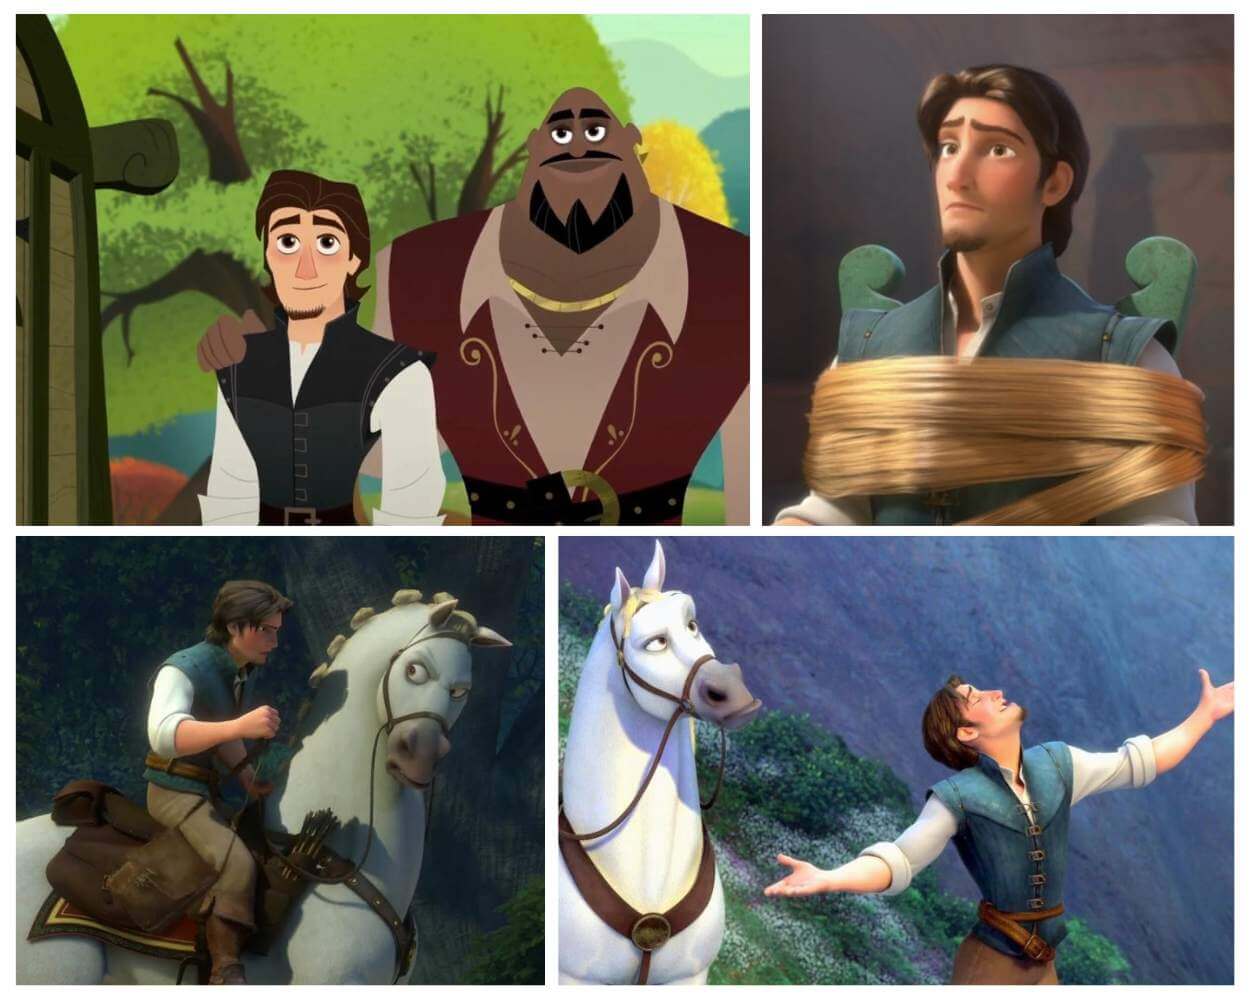 Flynn Rider, The Prince from Tangled